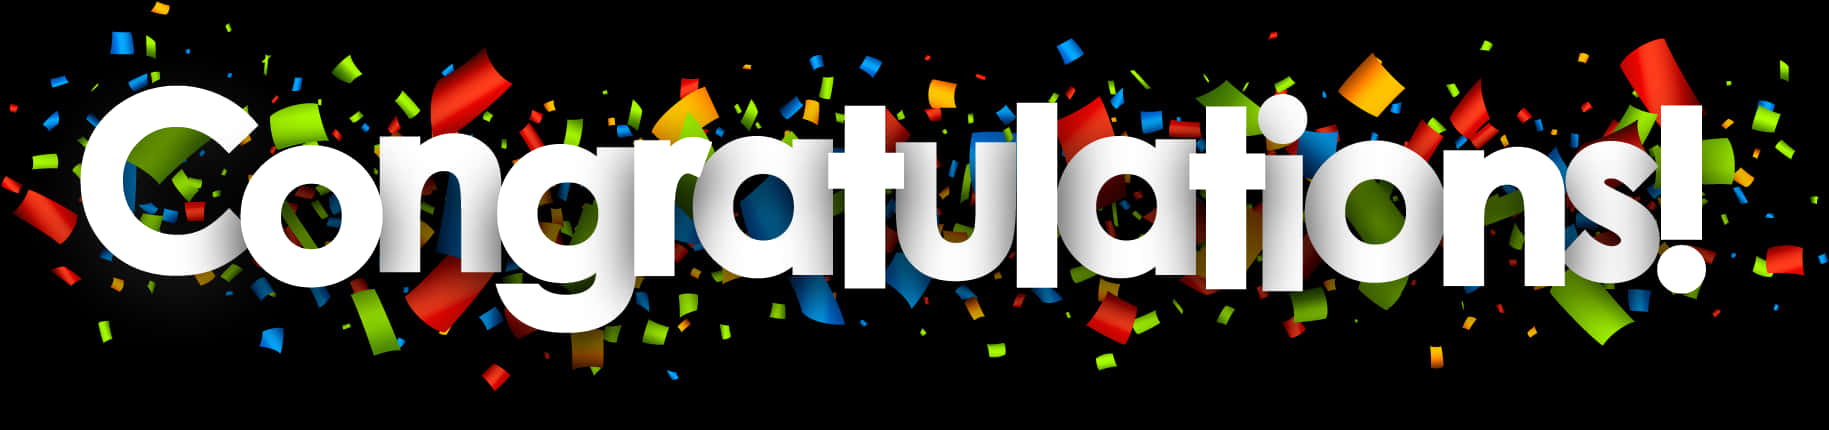 Celebratory Congratulations Banner PNG image